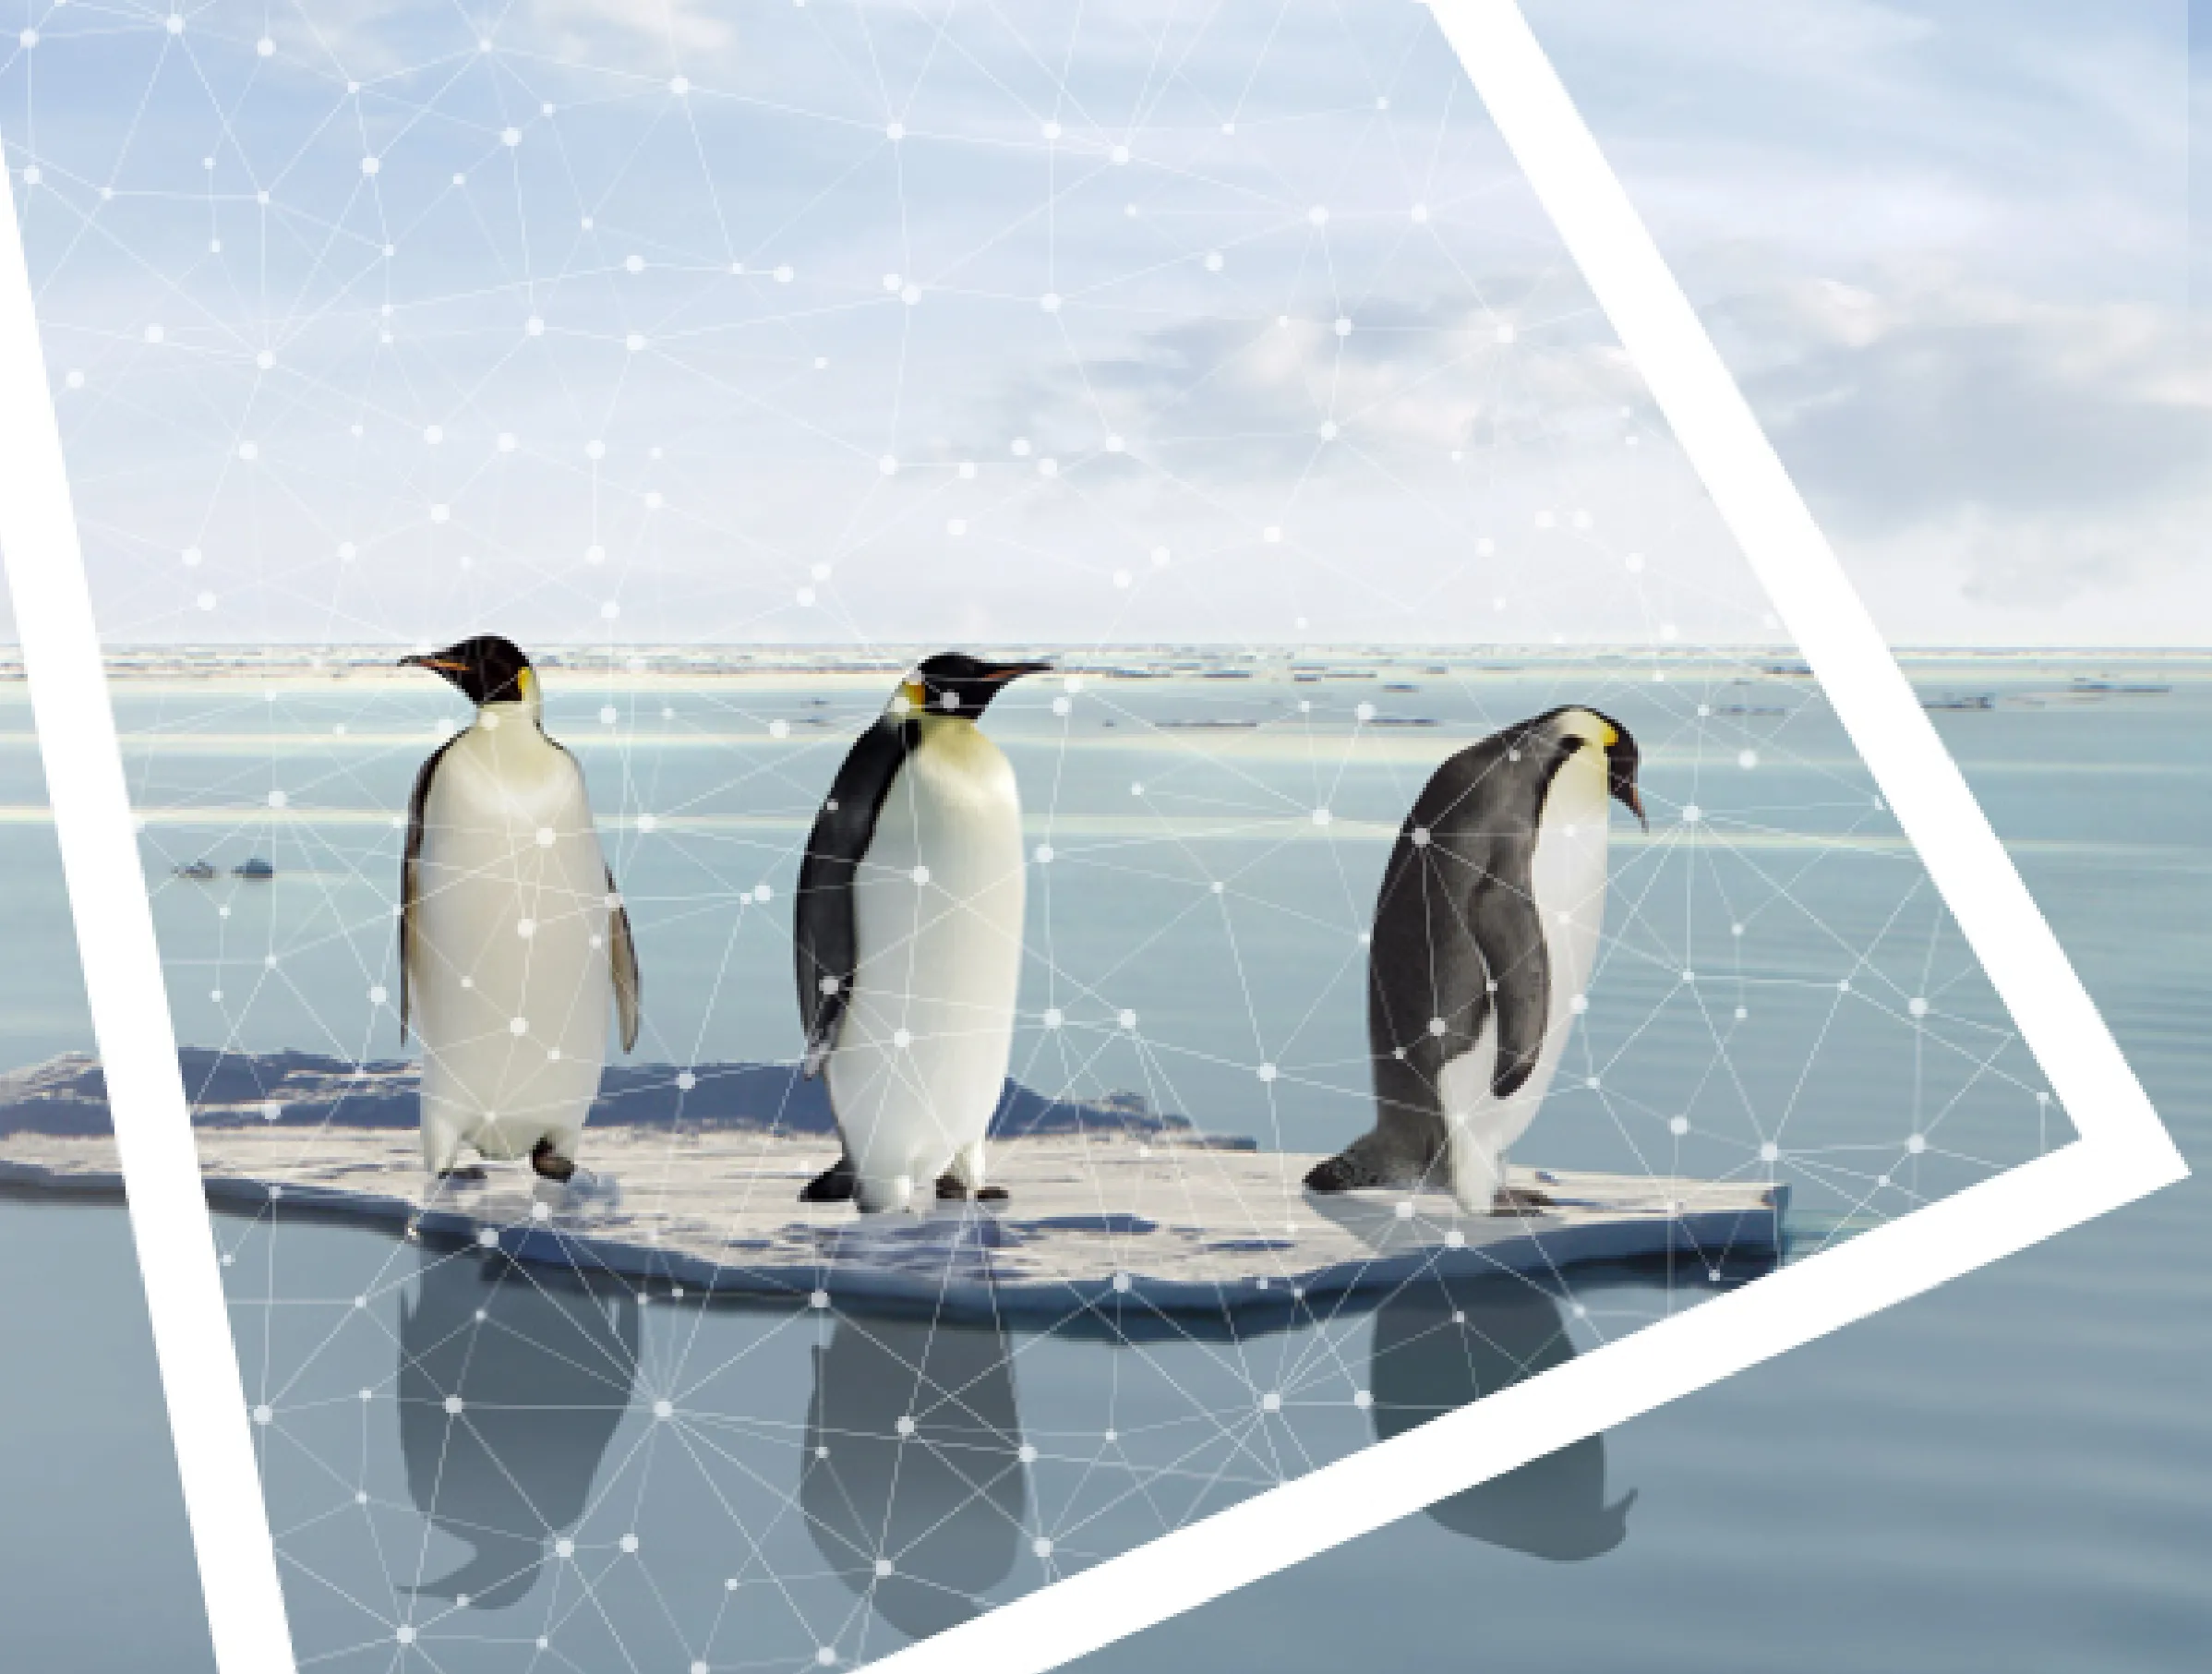 Penguins standing on ice, surrounded by water, and framed by the Forum for the Future 'window' logo 